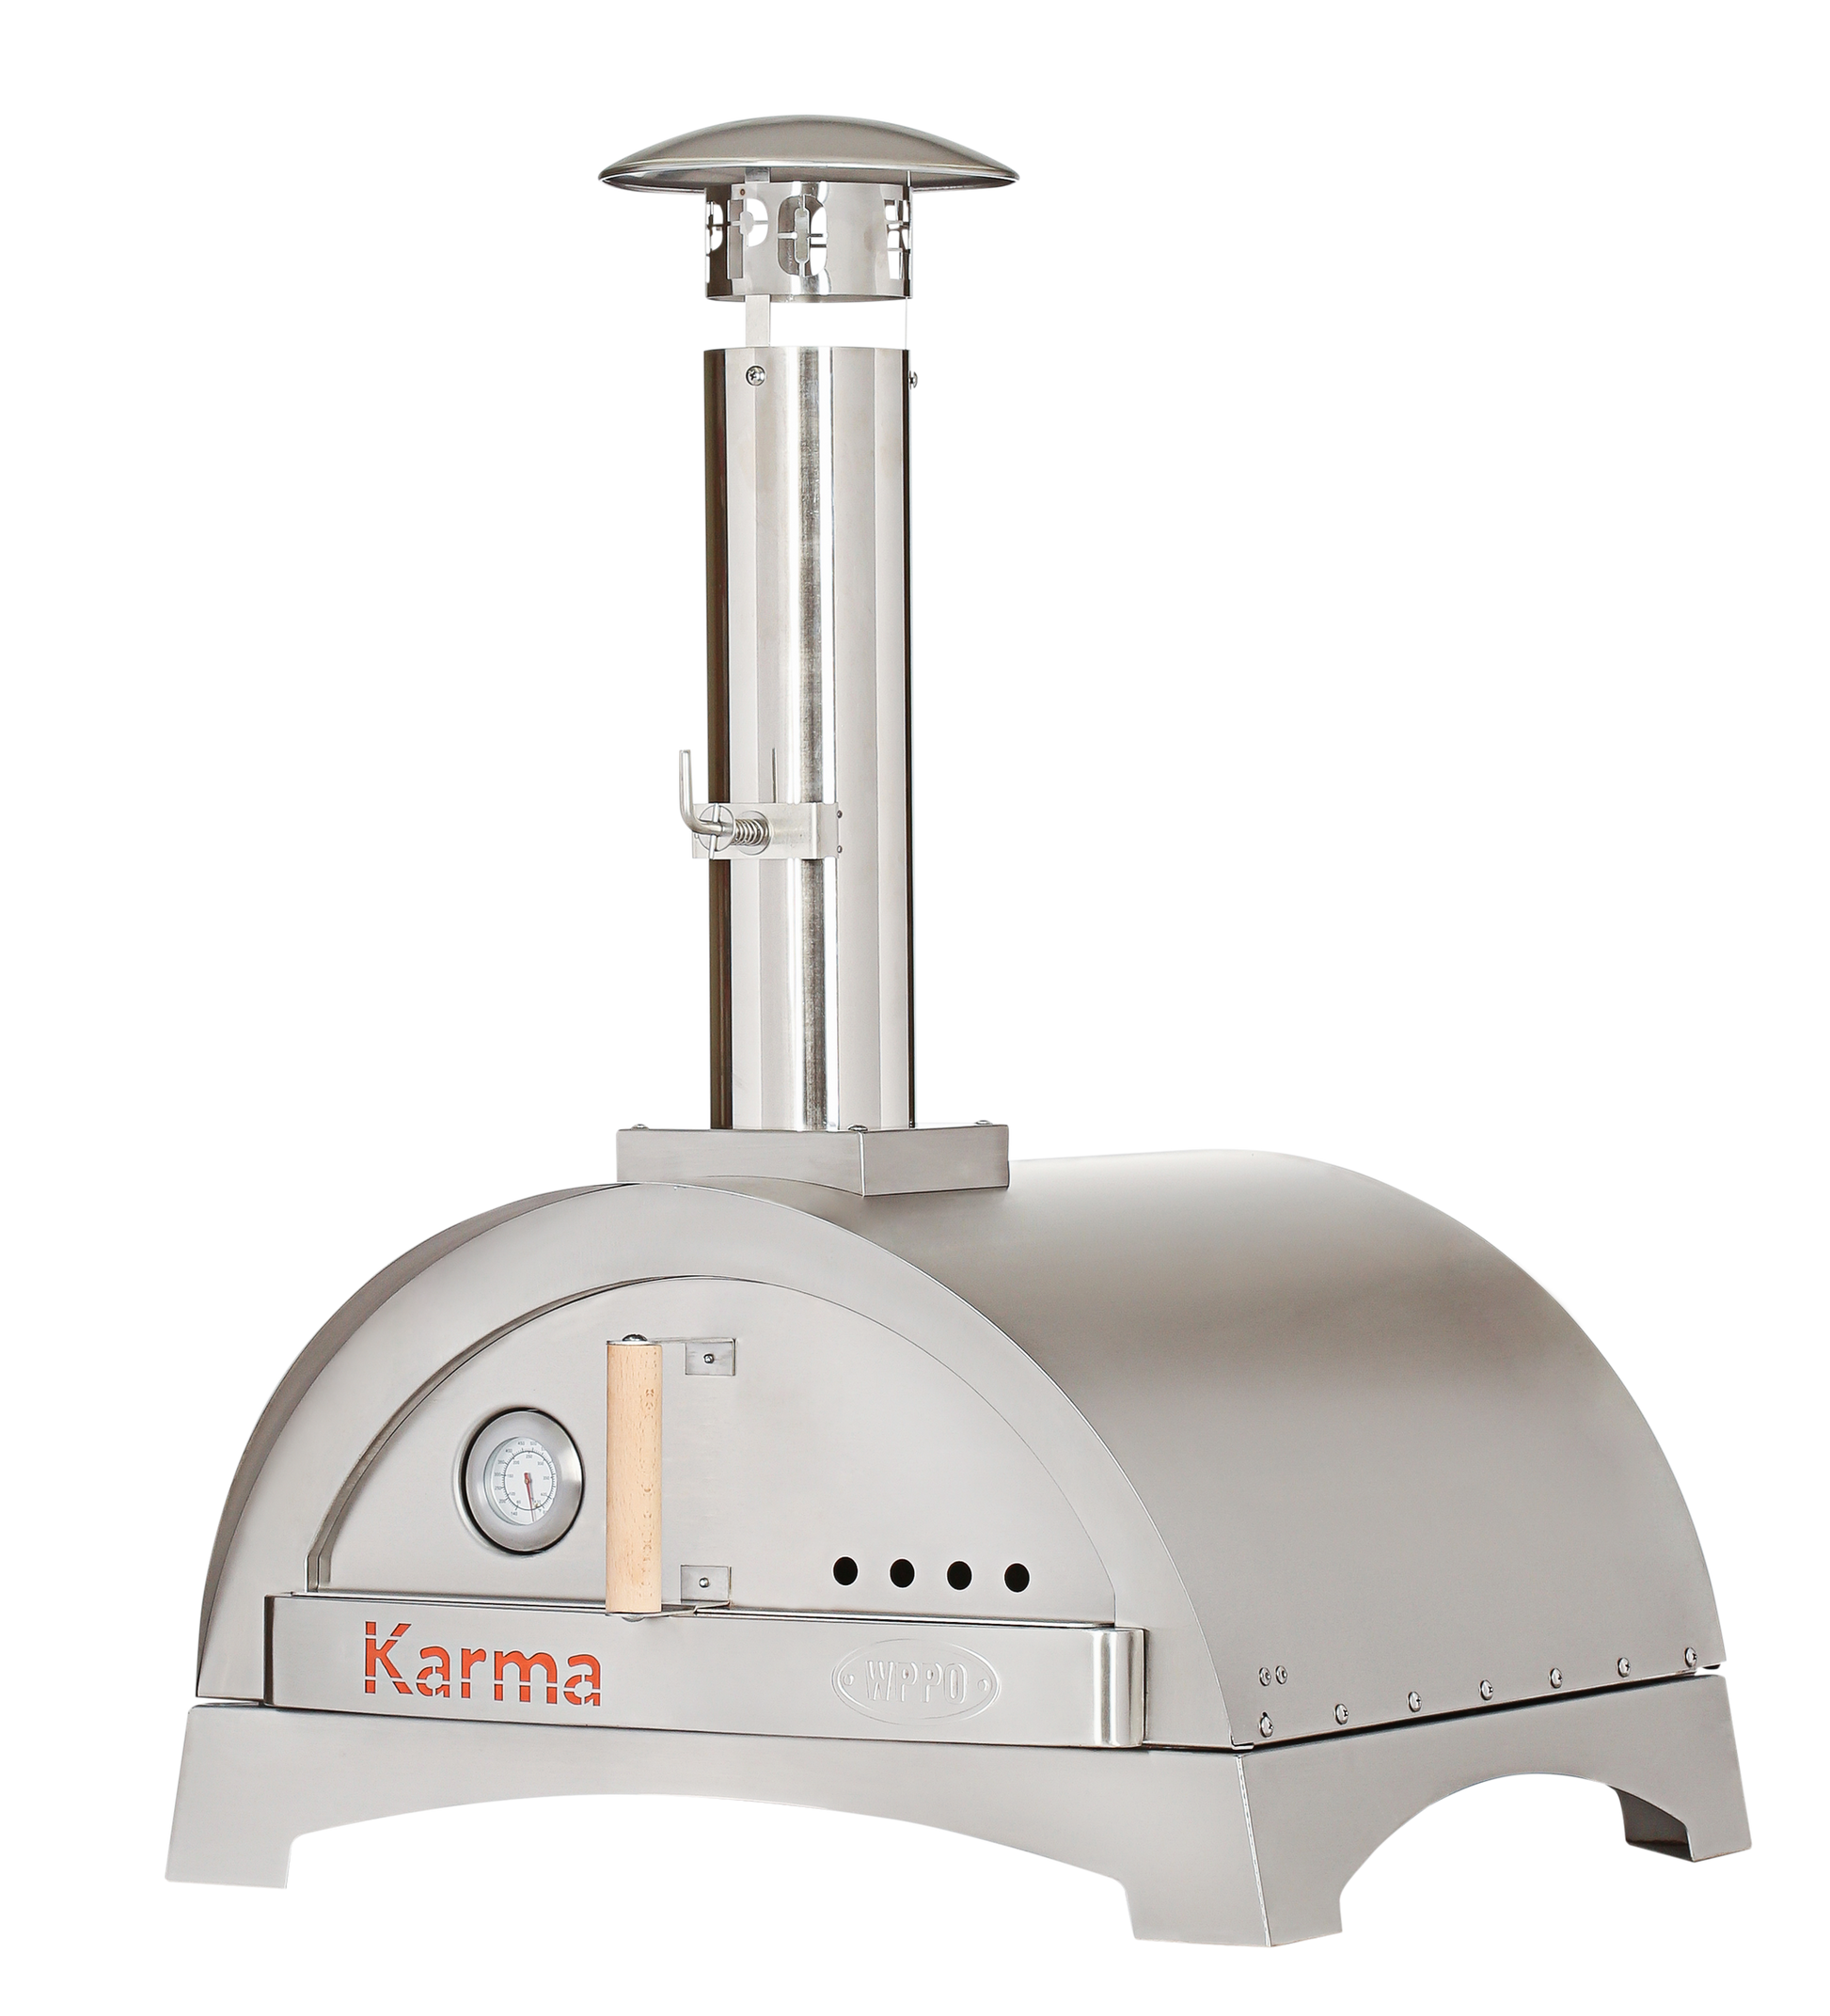 Main image of the WPPO™ Karma 25 Stainless Steel Pizza Oven w/ Countertop Base (SKU: WKK-01S-304) with a solid white background